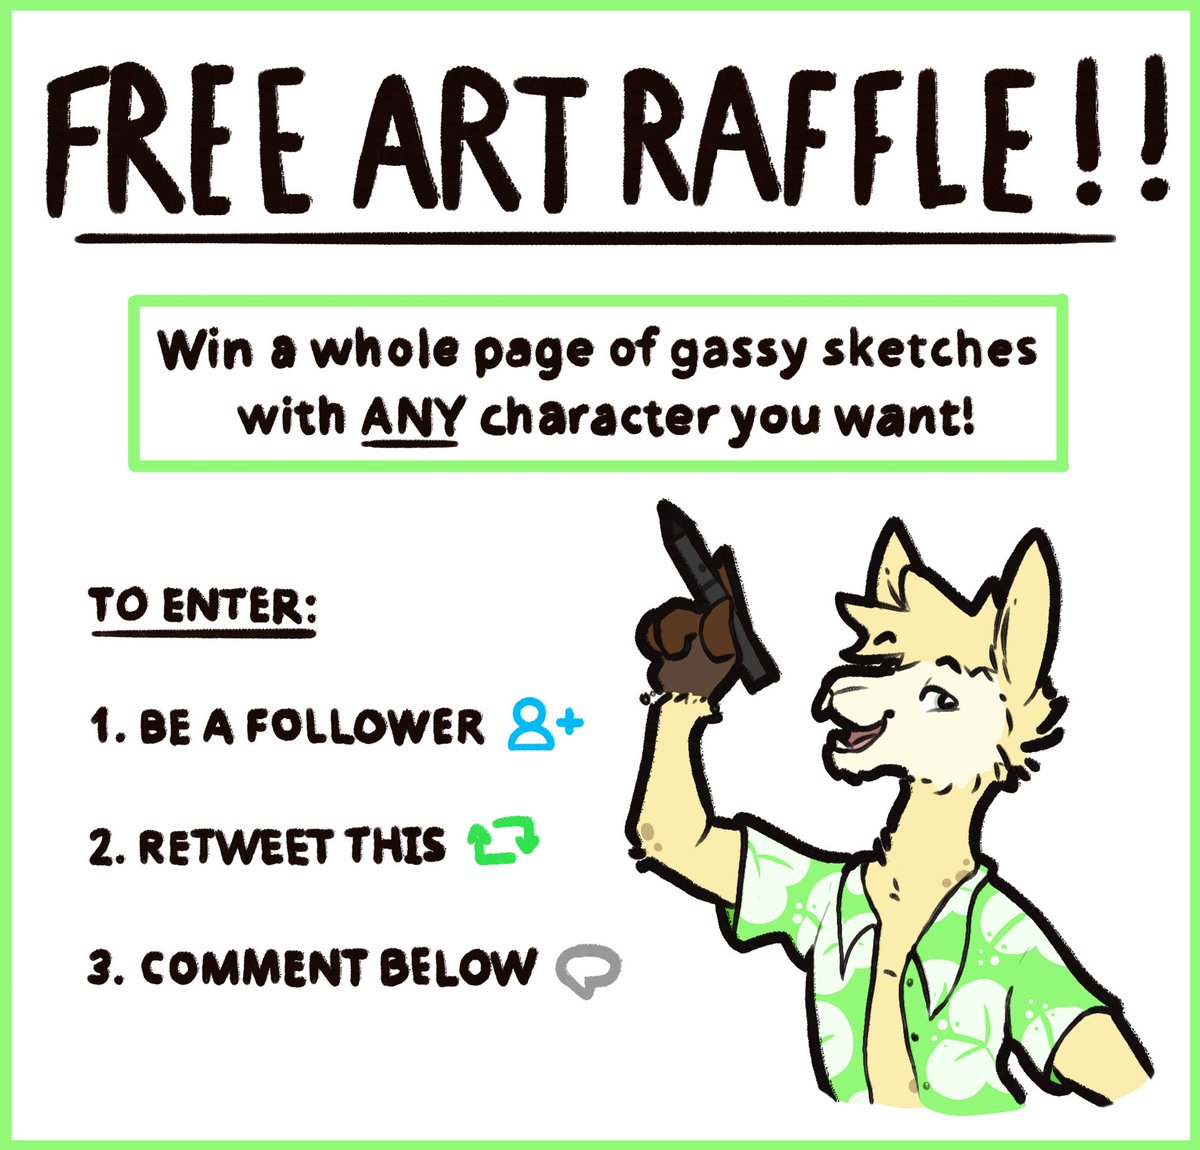 Okay guys, in celebration of 3,000 followers, I'm doing an art raffle! Check out the rules below. One winner will get a page of 5 - 6 random smelly sketches of a character of their choice! Good luck! #fartfetish #furryfart #fartart